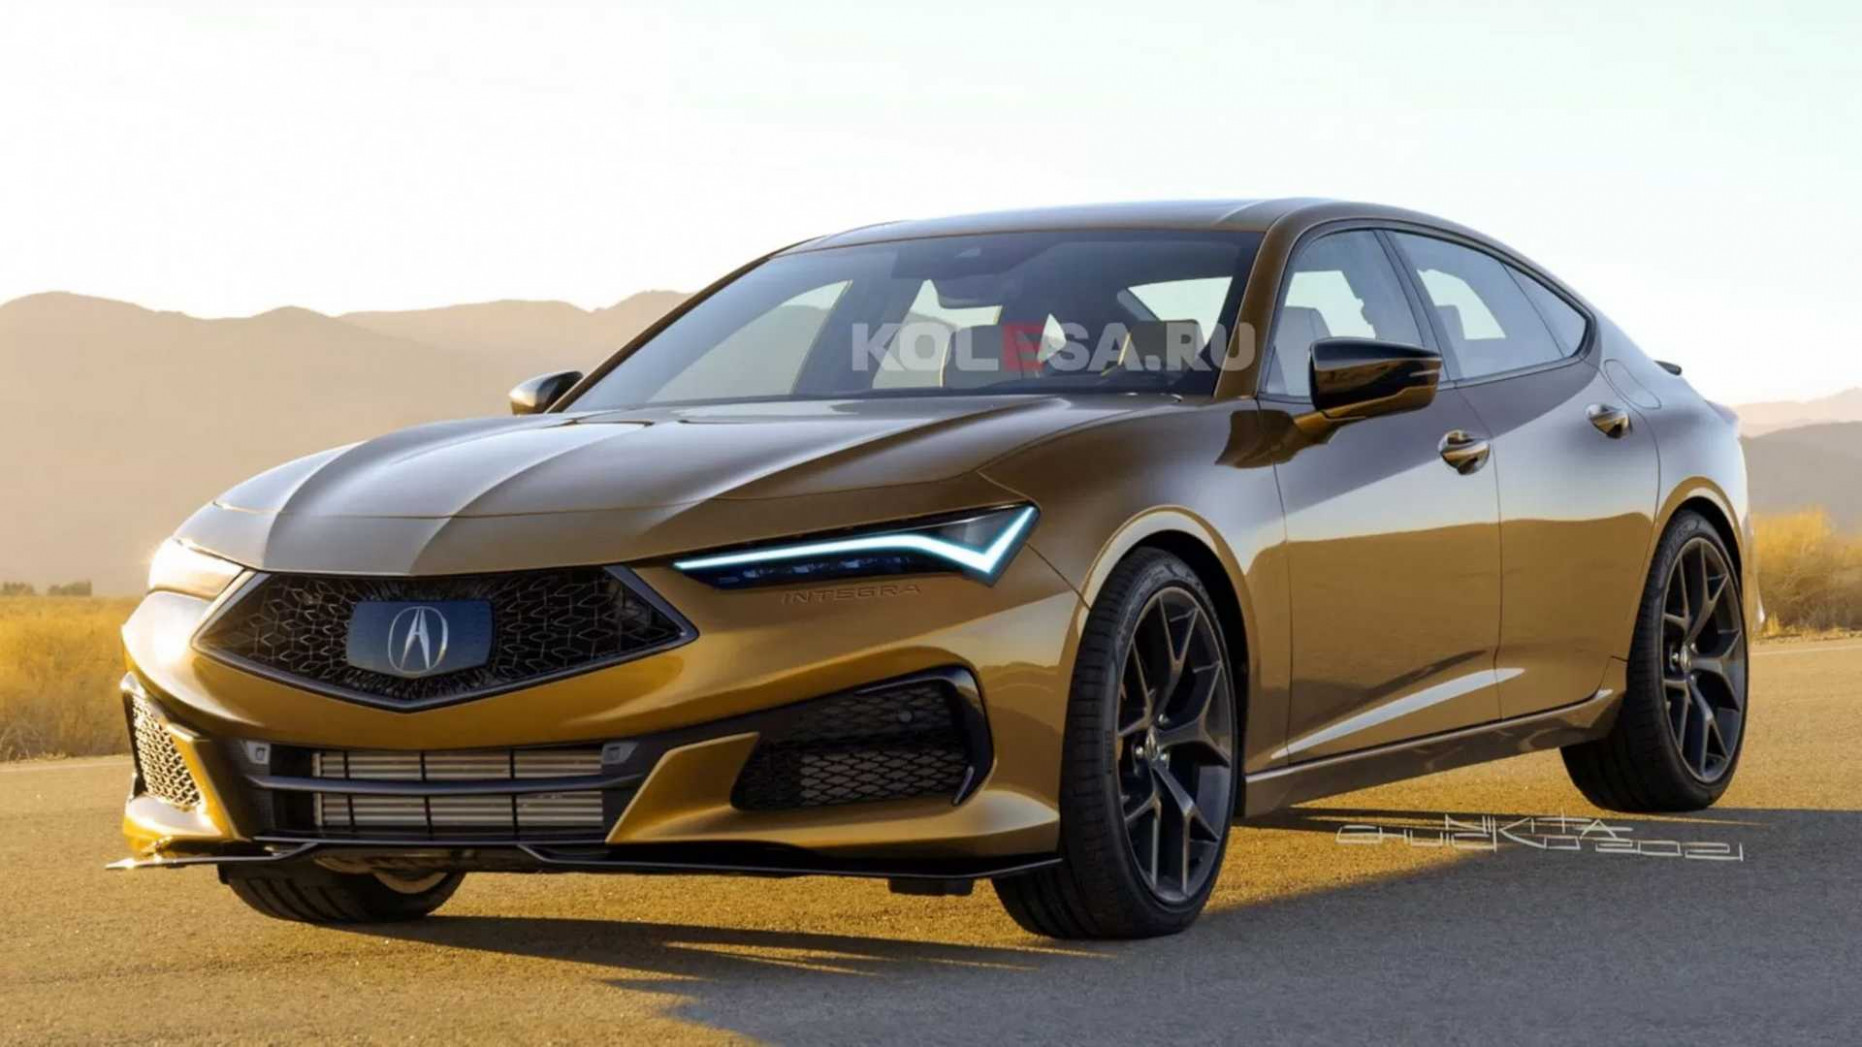 New Acura Integra Takes After The TLX In Unofficial Renderings - the new acura integra